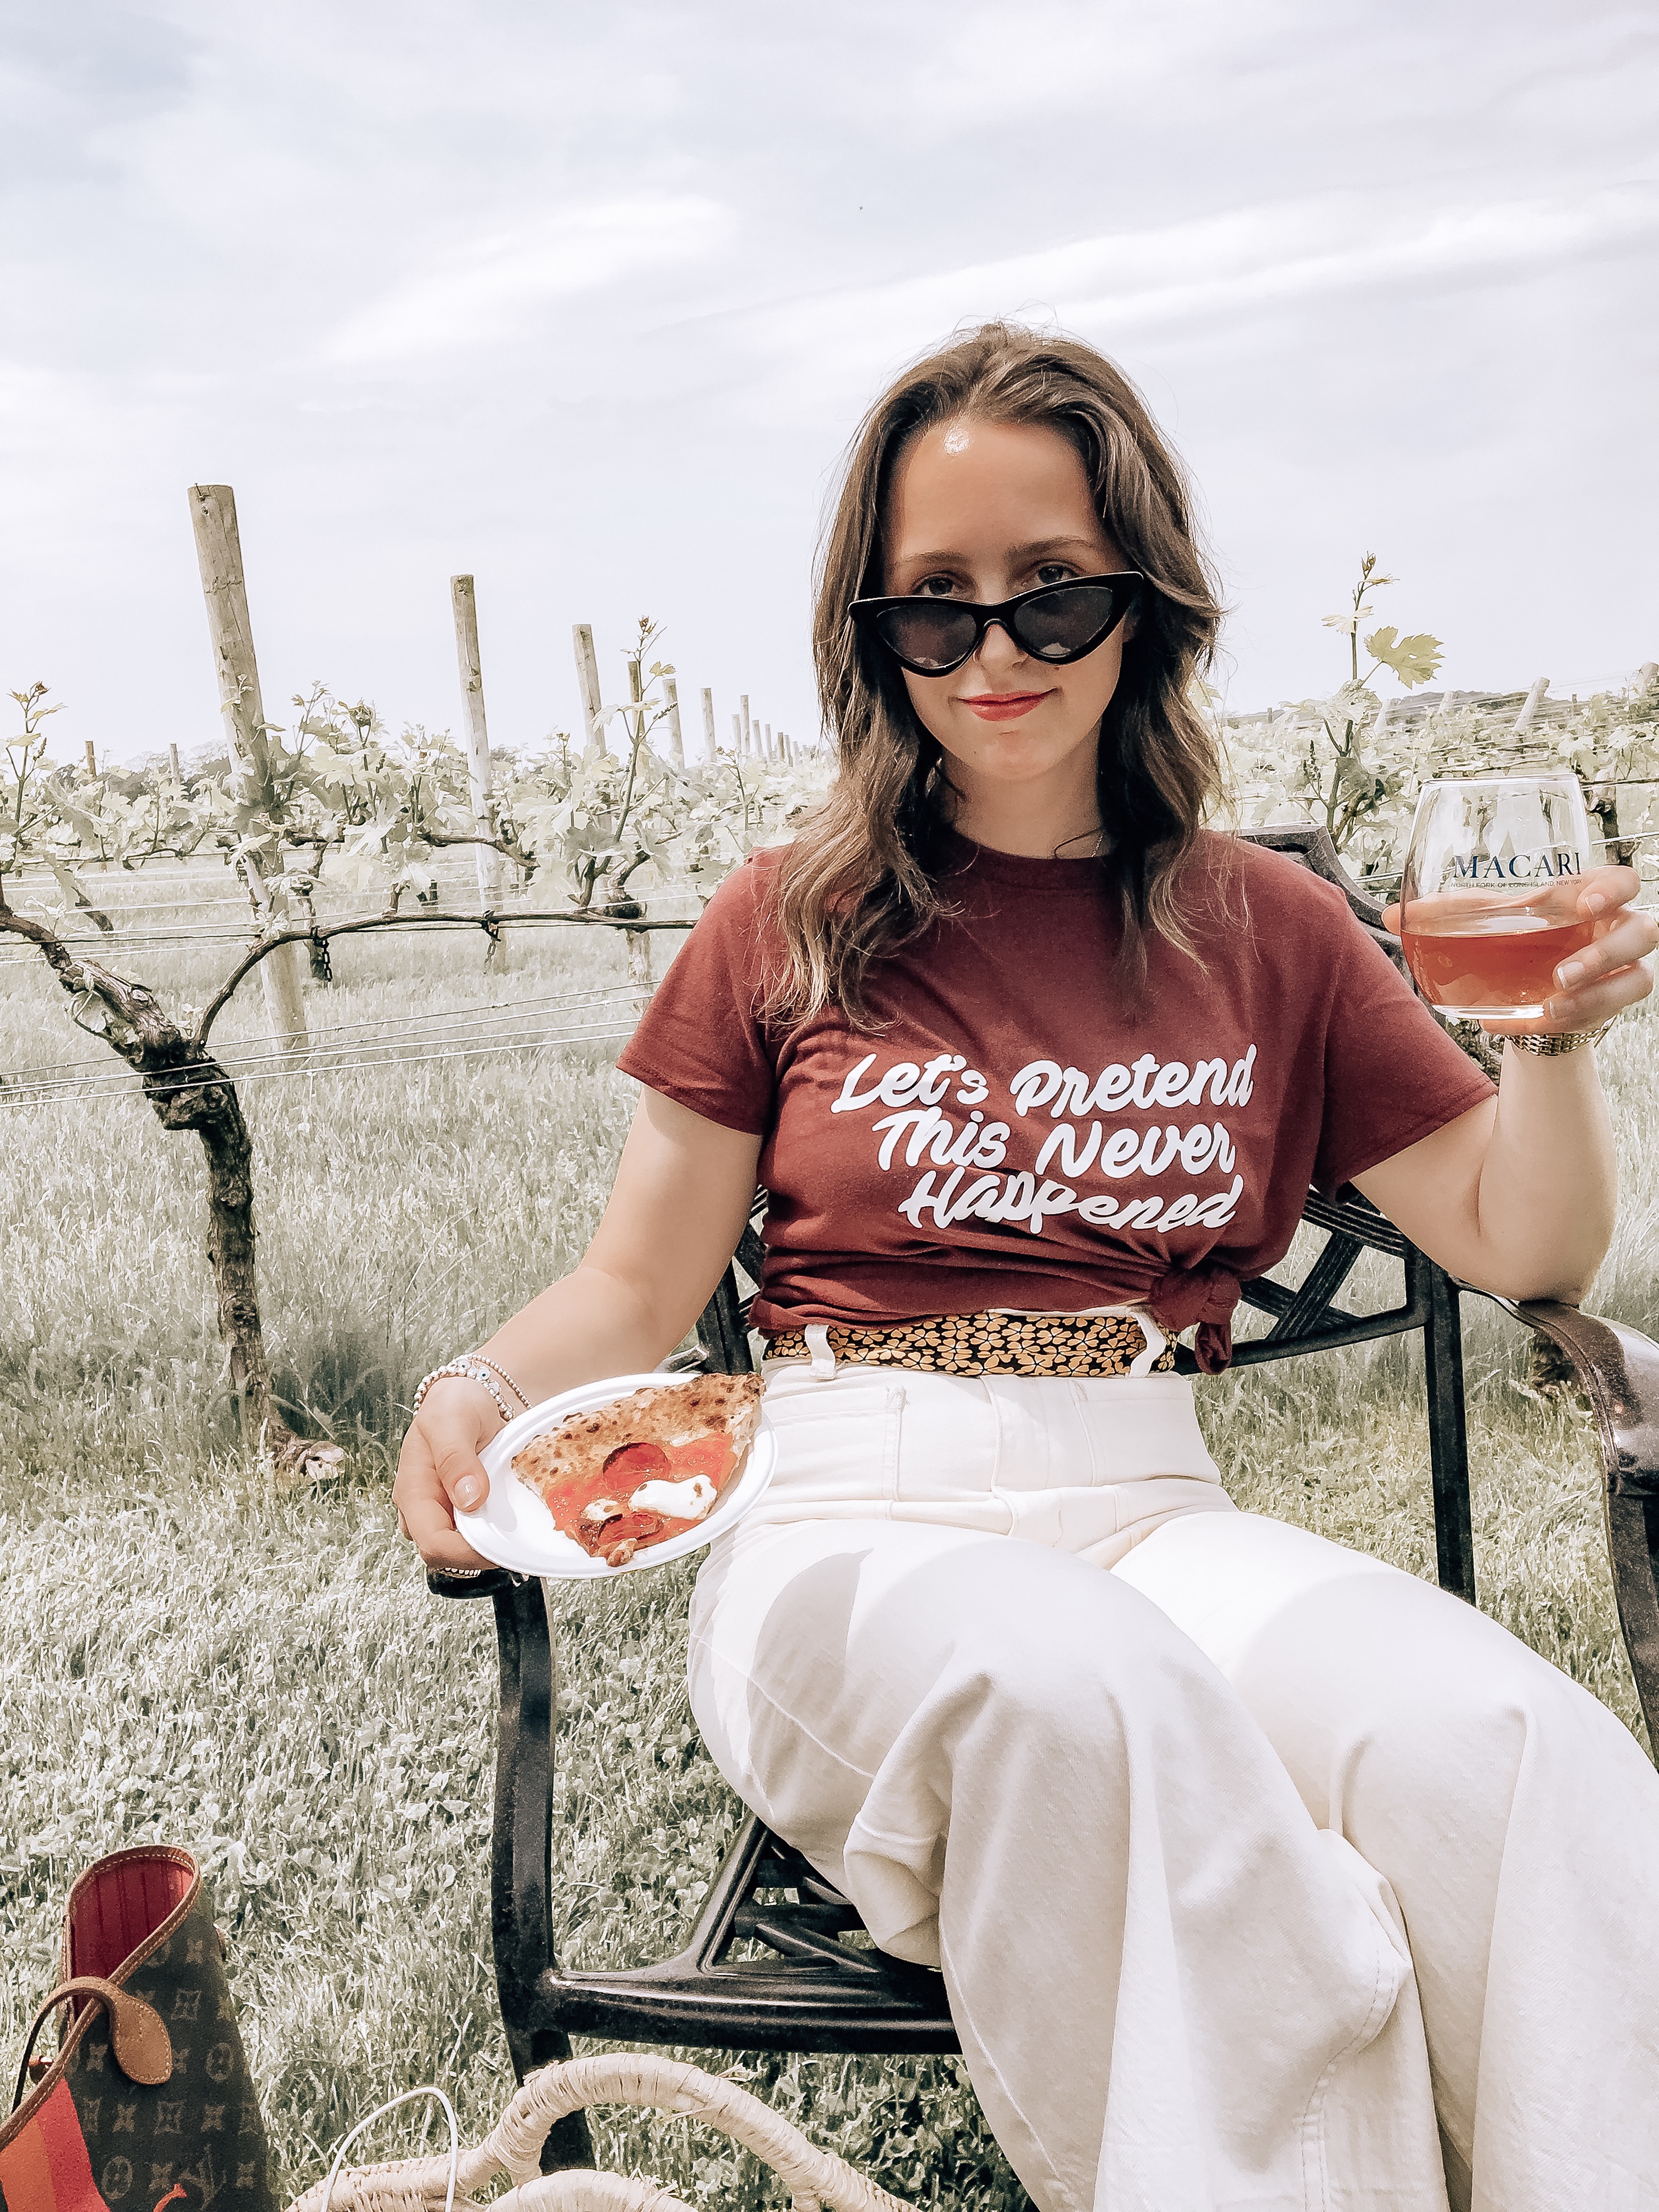 FIVE - Top 10 Things To Do On The North Fork This Summer - Wine and Pizza - Macari Vineyard #northfork #vineyard #wine #summer #summervacation #vacationstyle #travel #winery #blogger #travelblog #longisland #newyork